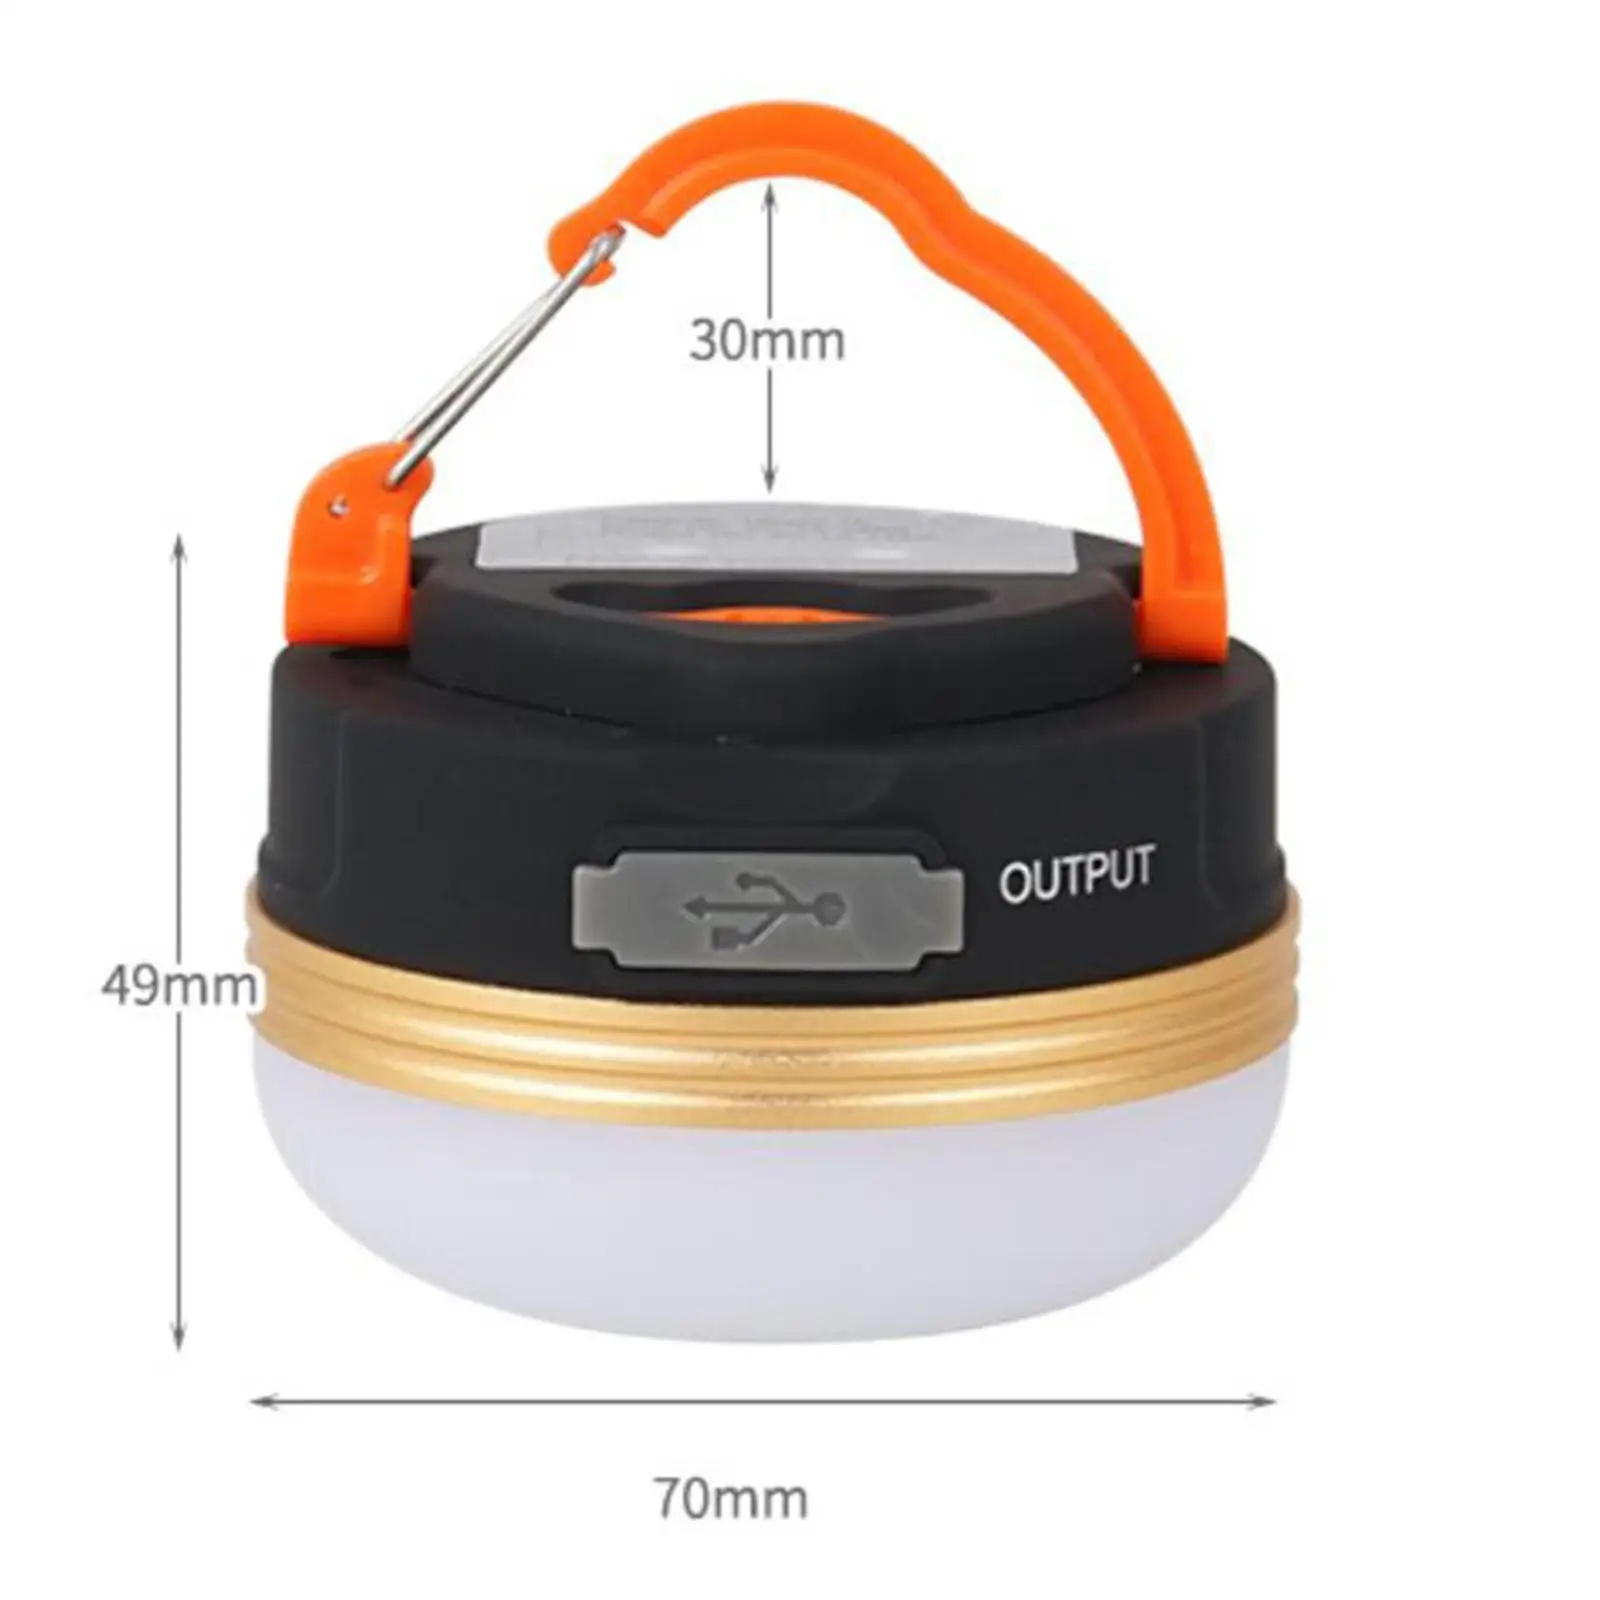 LED Camping Lantern Hanging Tent Light Electric Lantern for Survival Gear Emergency Hiking Camping Accessories Power Failure